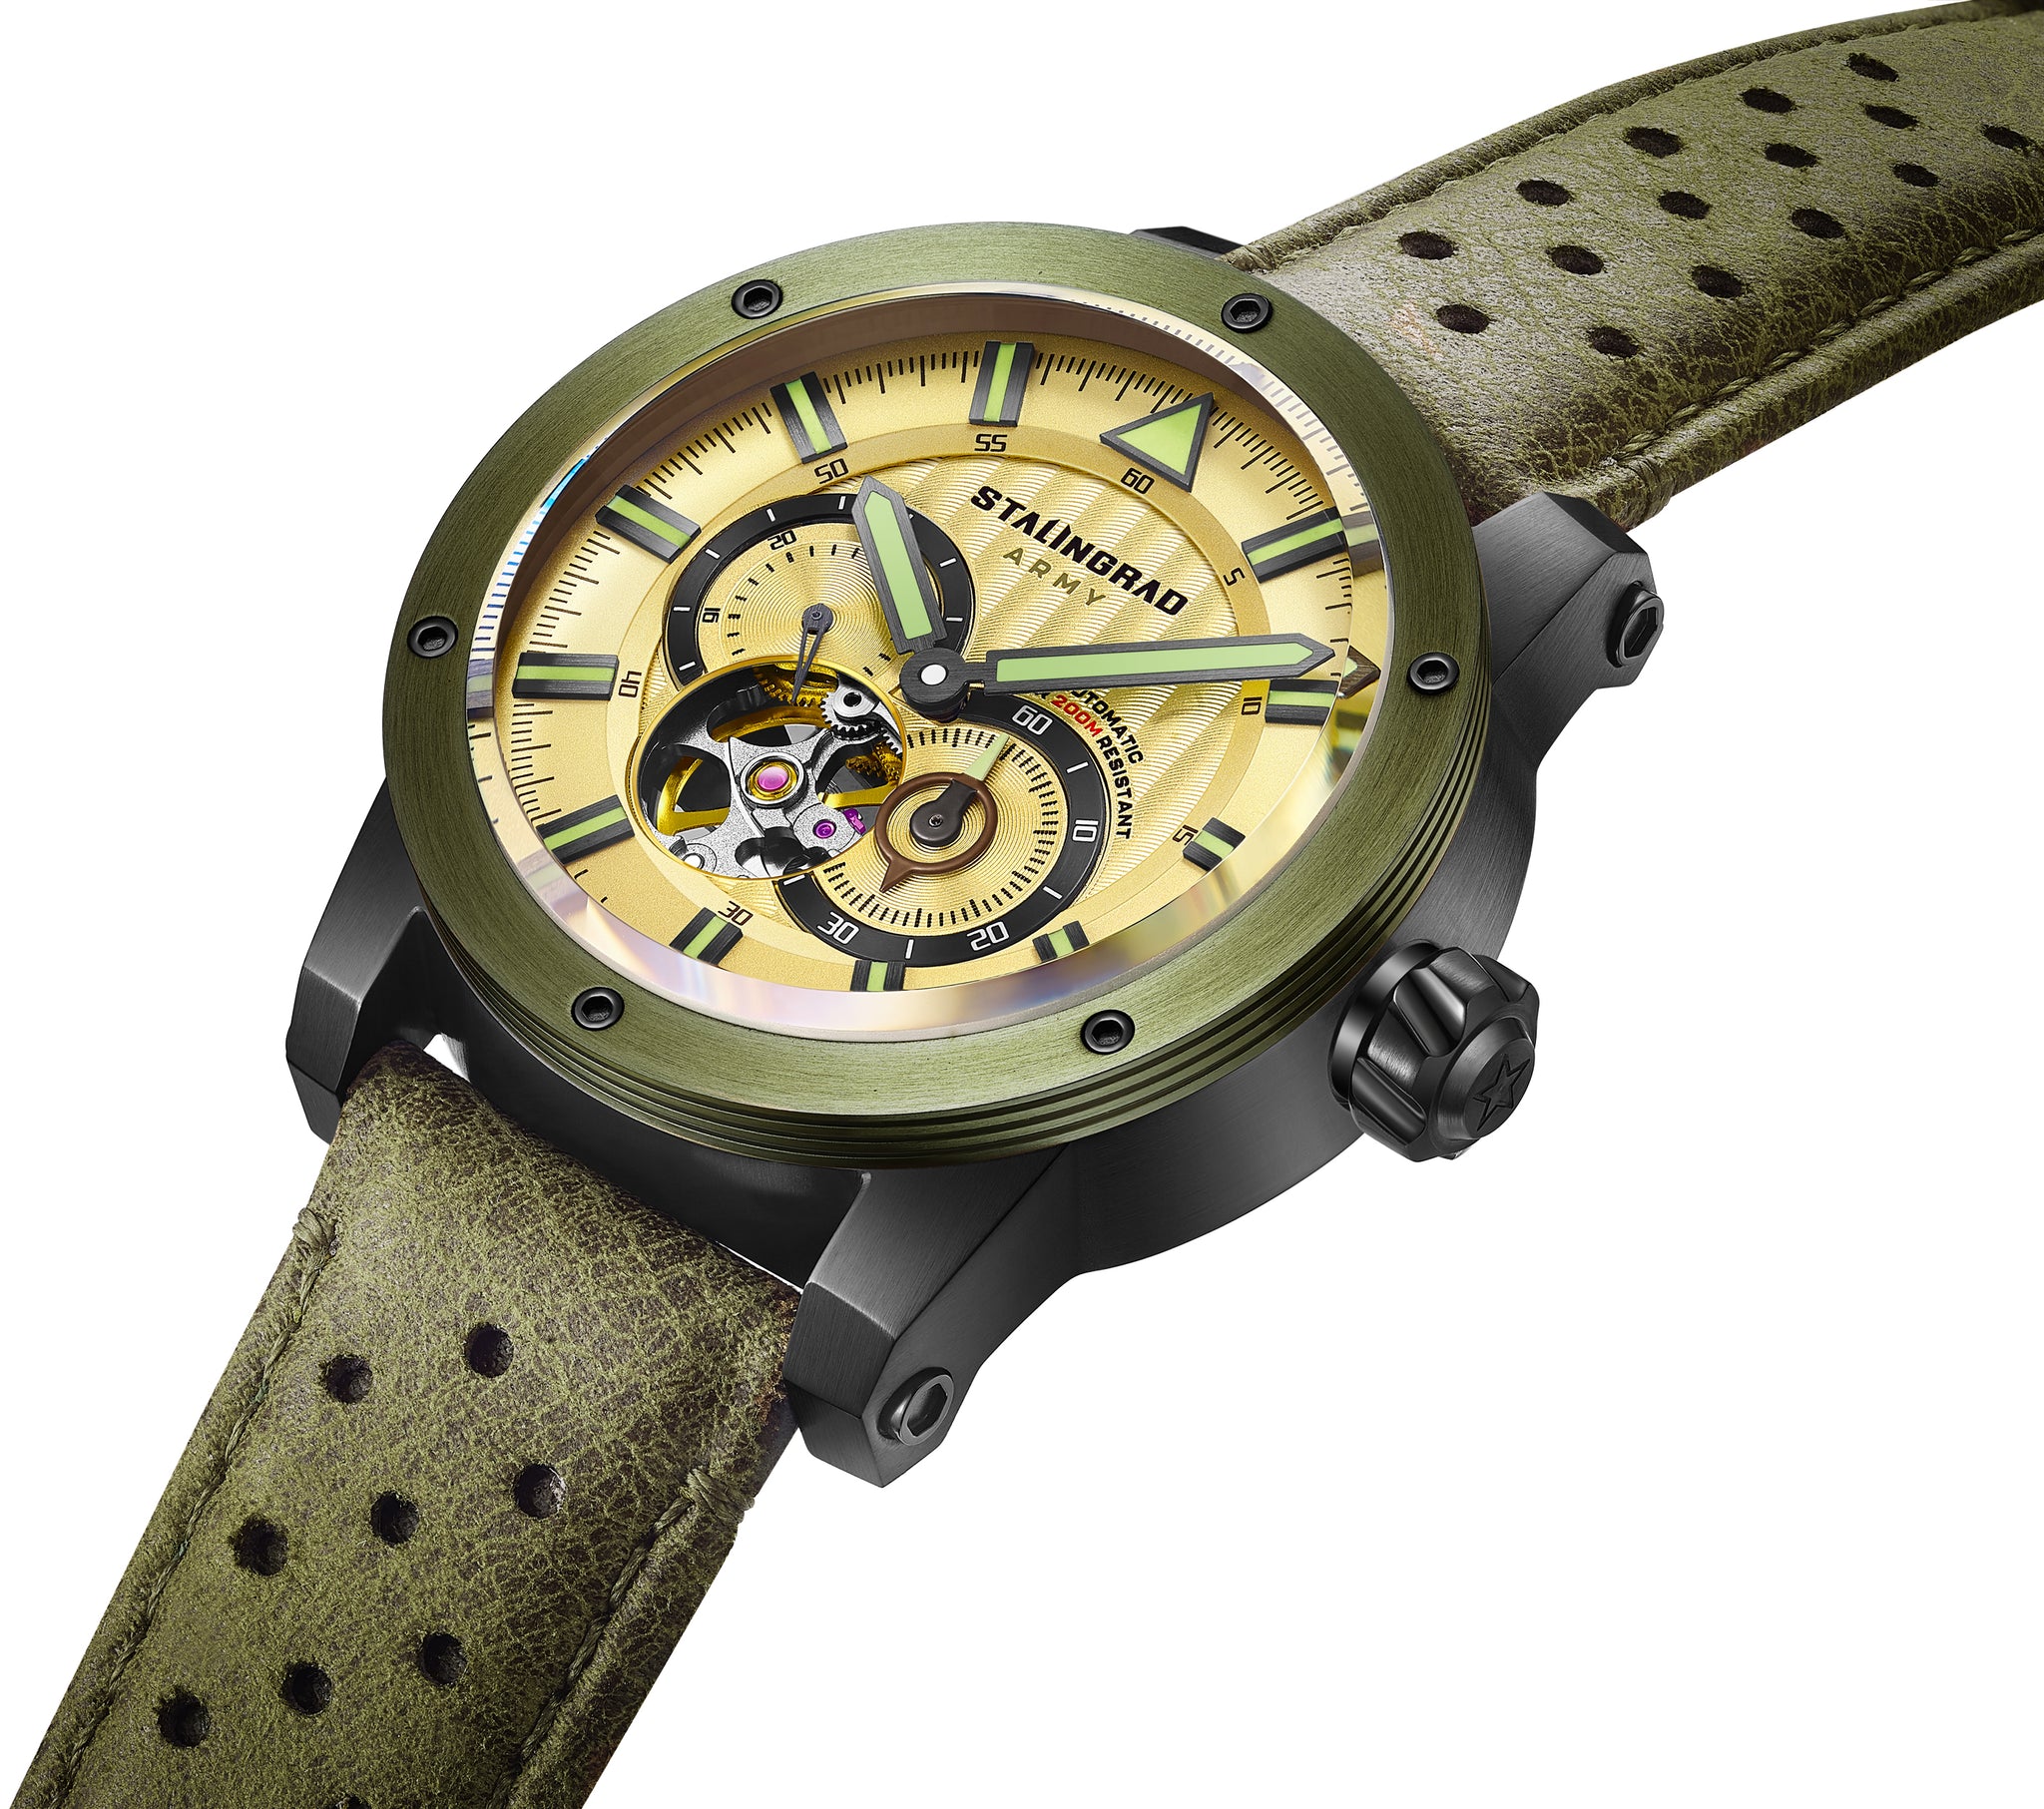 Stalingrad Red Army watch with a beige dial, a circle cut out in the dial showing the movement. A green bezel on a green leather strap. Diagonal view of the watch on a white background.